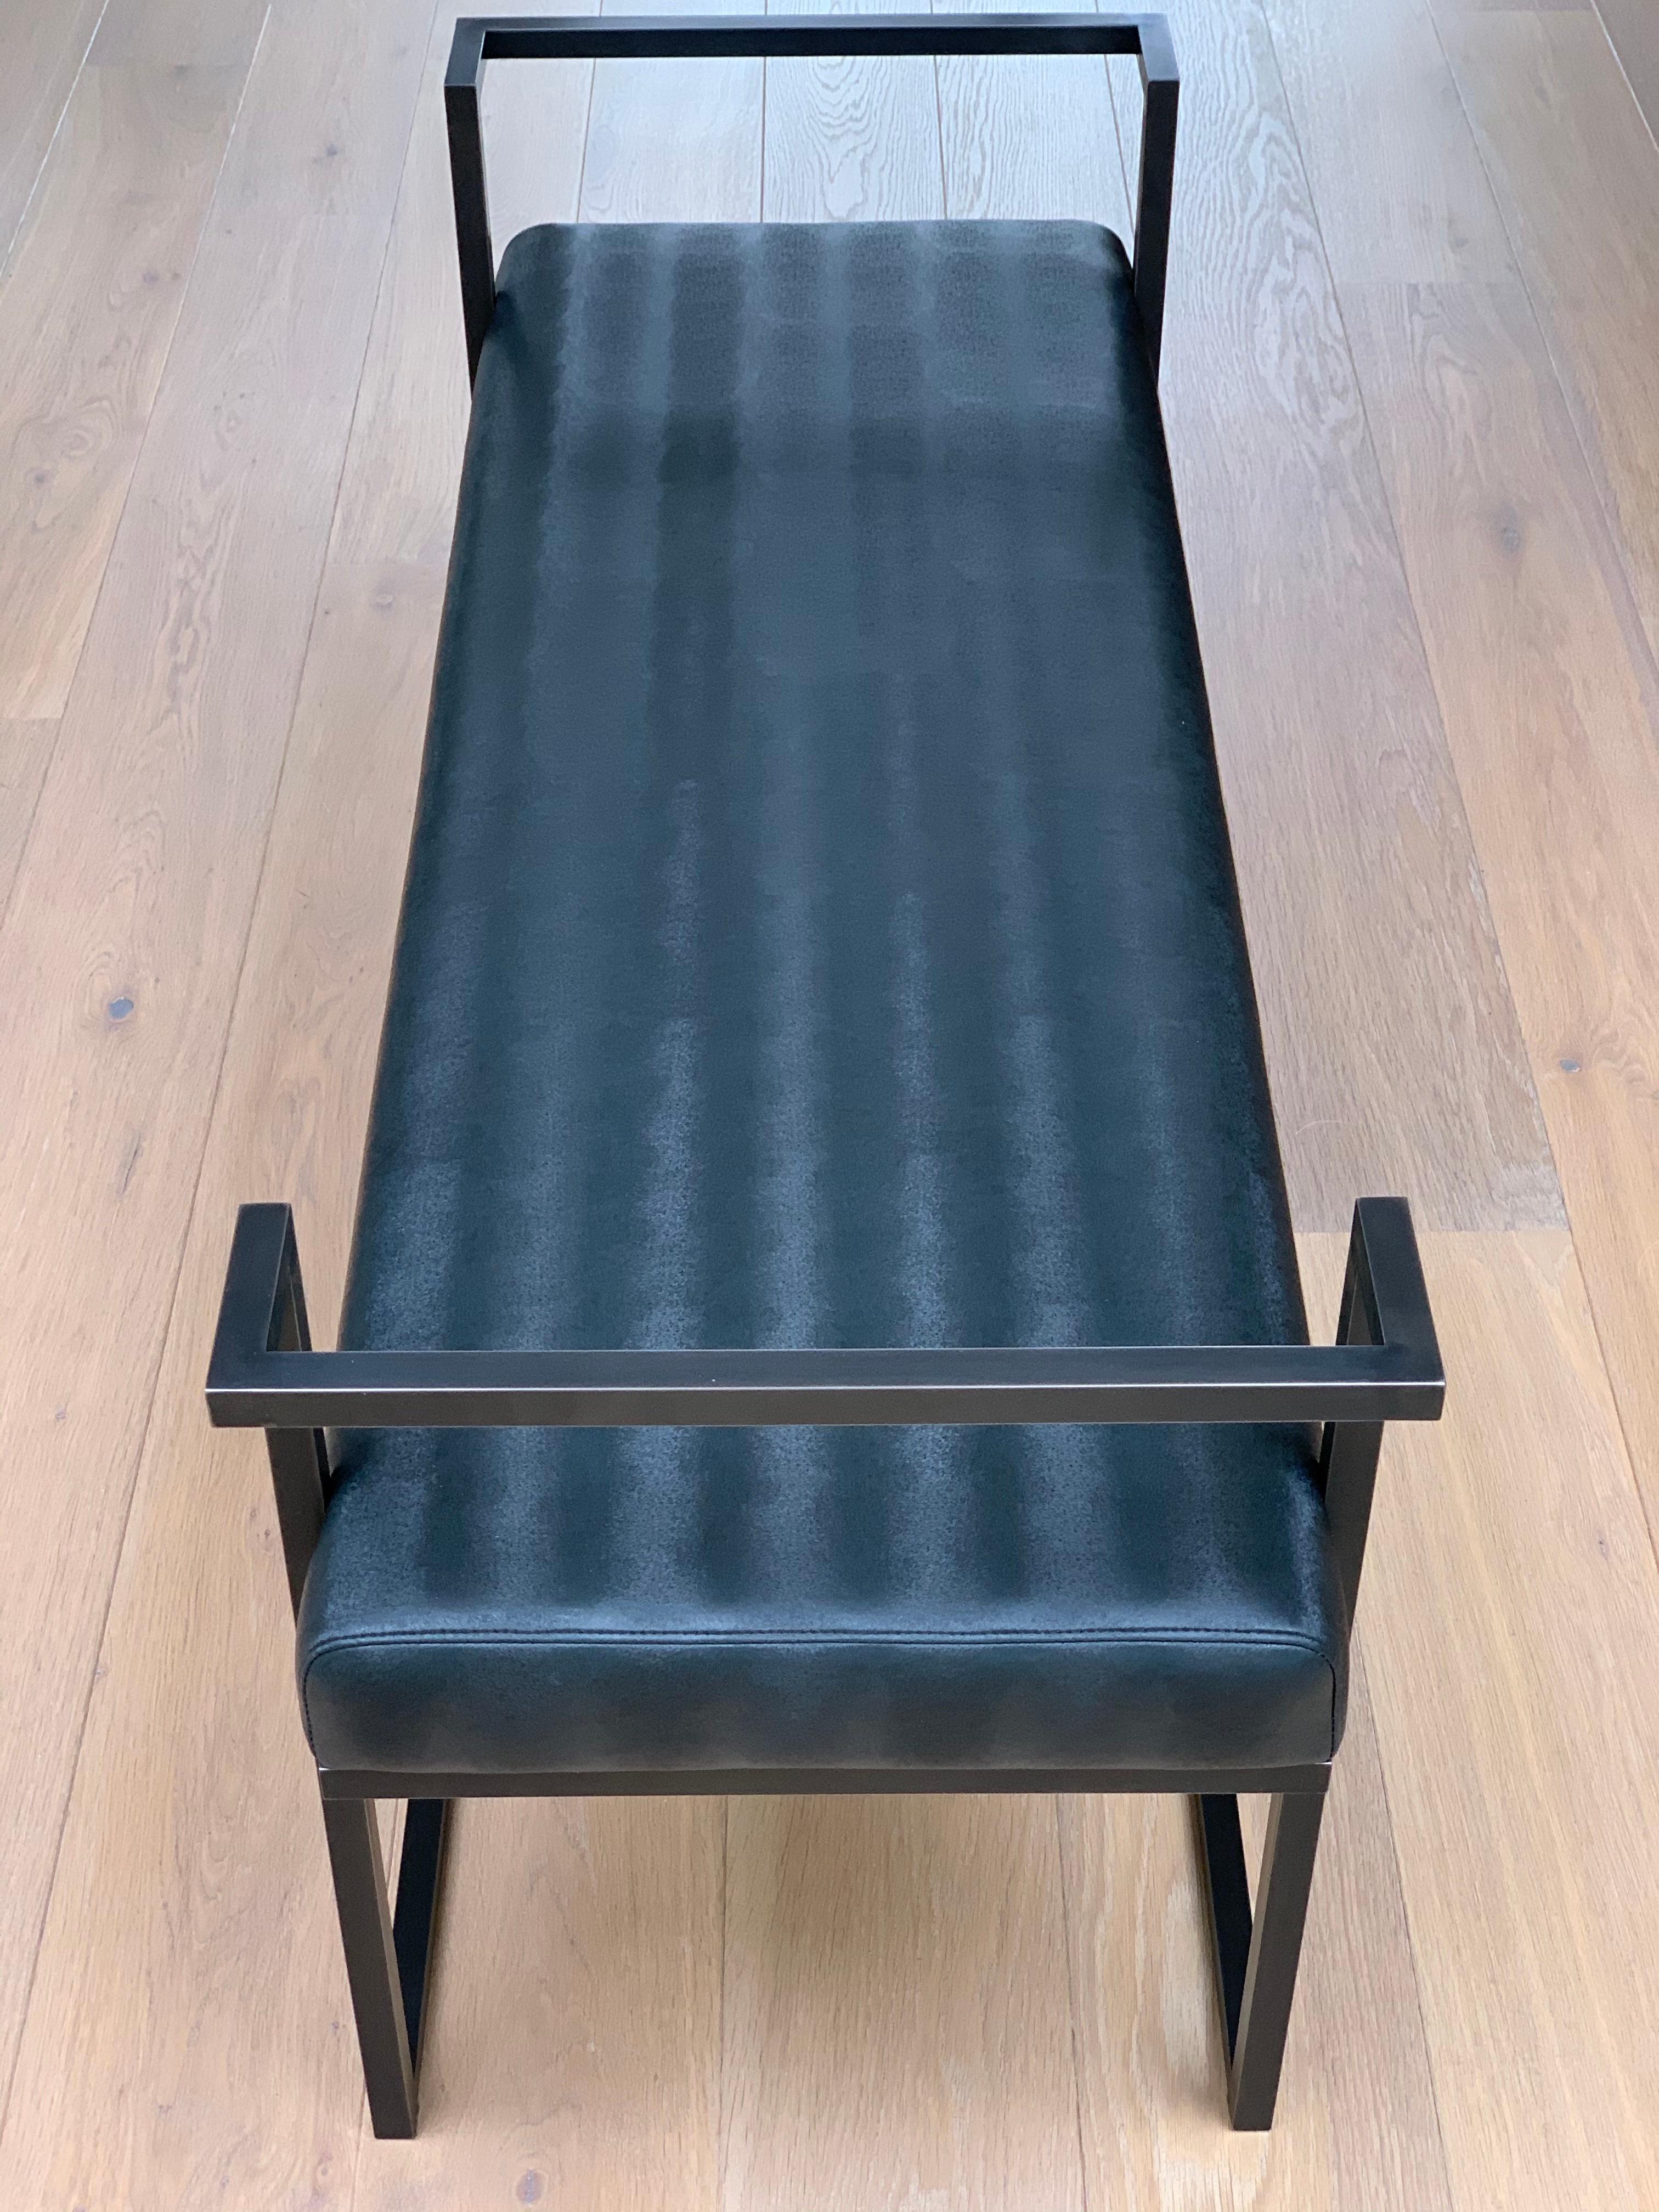 British Industrial Inspired Eros Bench in Blackened Steel and Black Pony Ultraleather For Sale